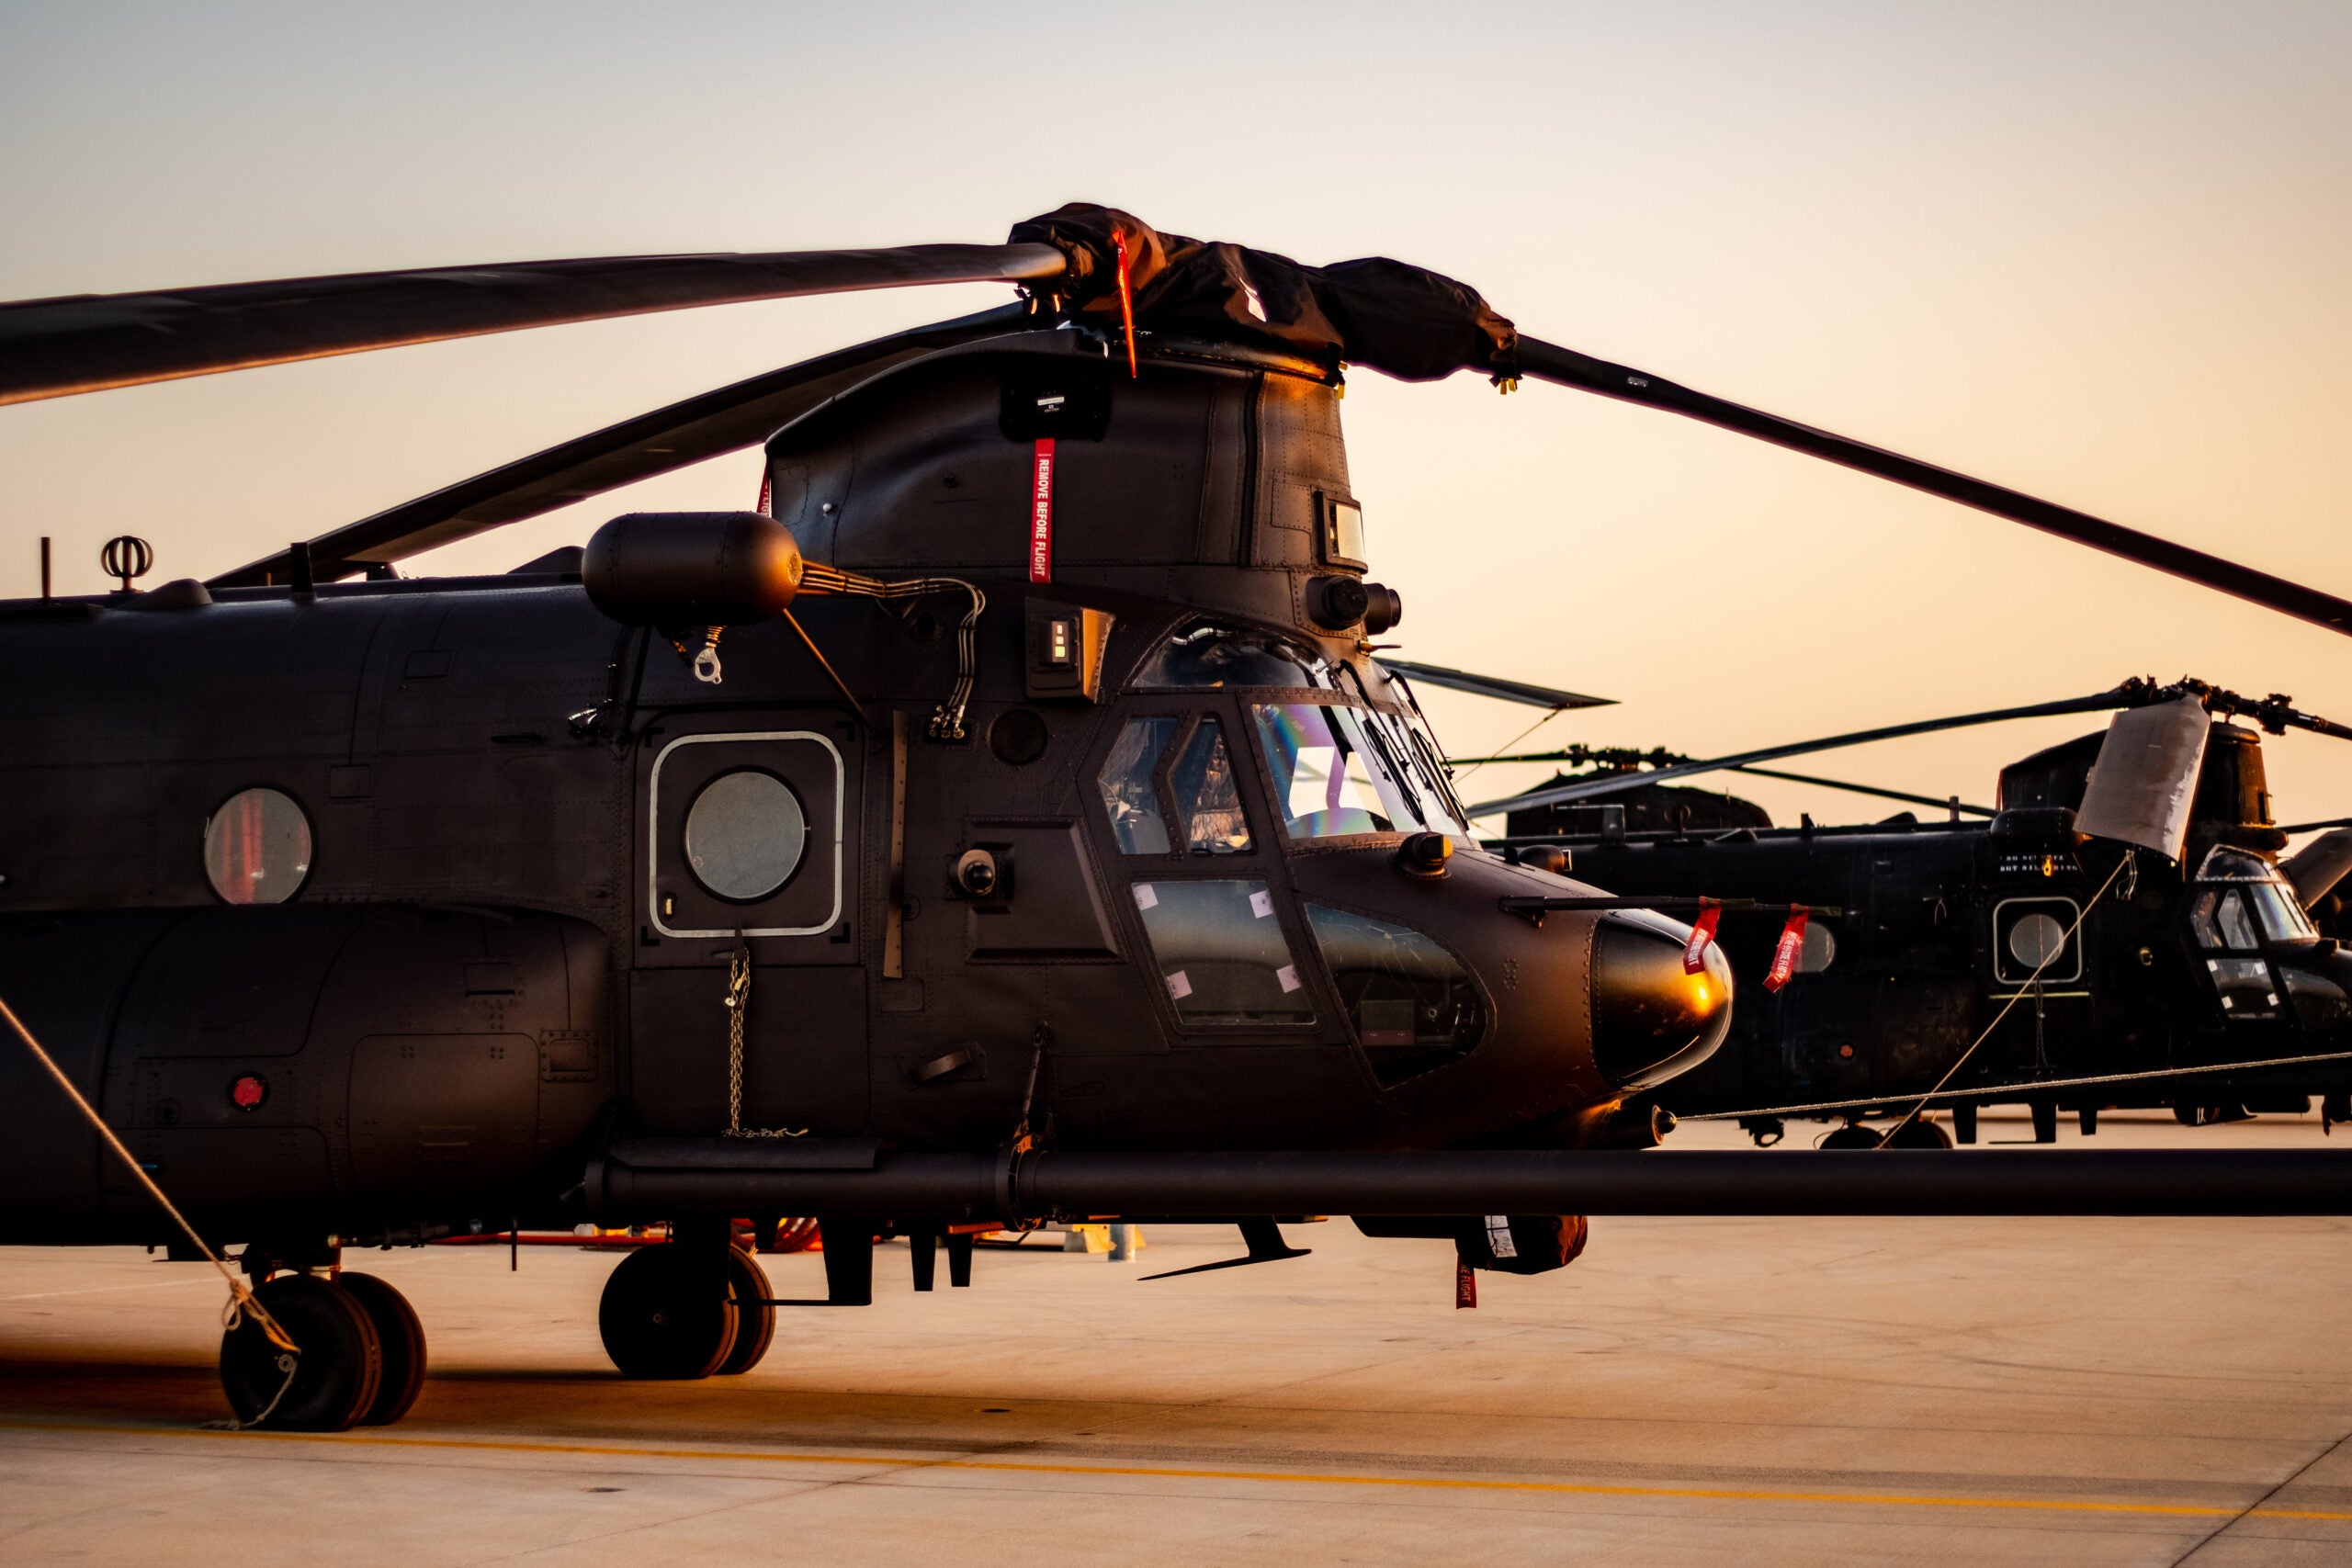 220505-N-KD414-0131 Three MH-47 Chinook helicopters, assigned to the 160th Special Operations Aviation Regiment (160th SOAR), stand by during a sunset onboard Point Mugu Apr. 30, 2022. NBVC is comprised of three distinct facilities: Point Mugu, Port Hueneme, and San Nicolas Island. It is the largest employer in Ventura County and actively protects California’s largest coastal wetlands through its award-winning environmental programs.